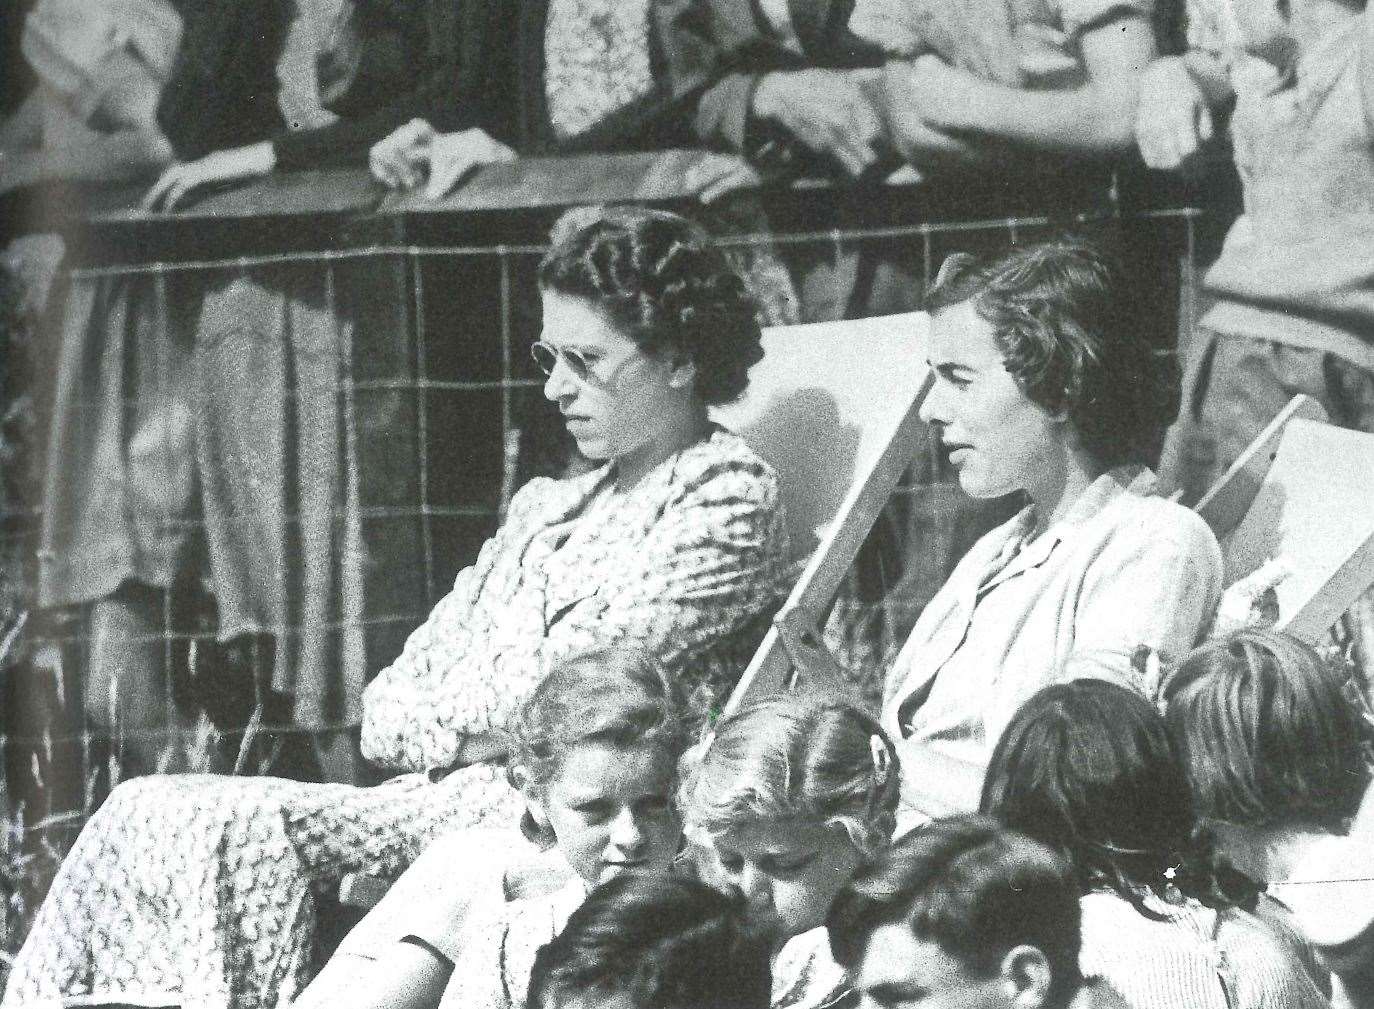 In August 1949, The Queen - then still Princess Elizabeth, was pictured watching a game of cricket at Mersham-le-Hatch with her friend Lady Brabourne. The Duke of Edinburgh played for Mersham against Aldington. He took three wickets but was himself later bowled out lbw on his first ball